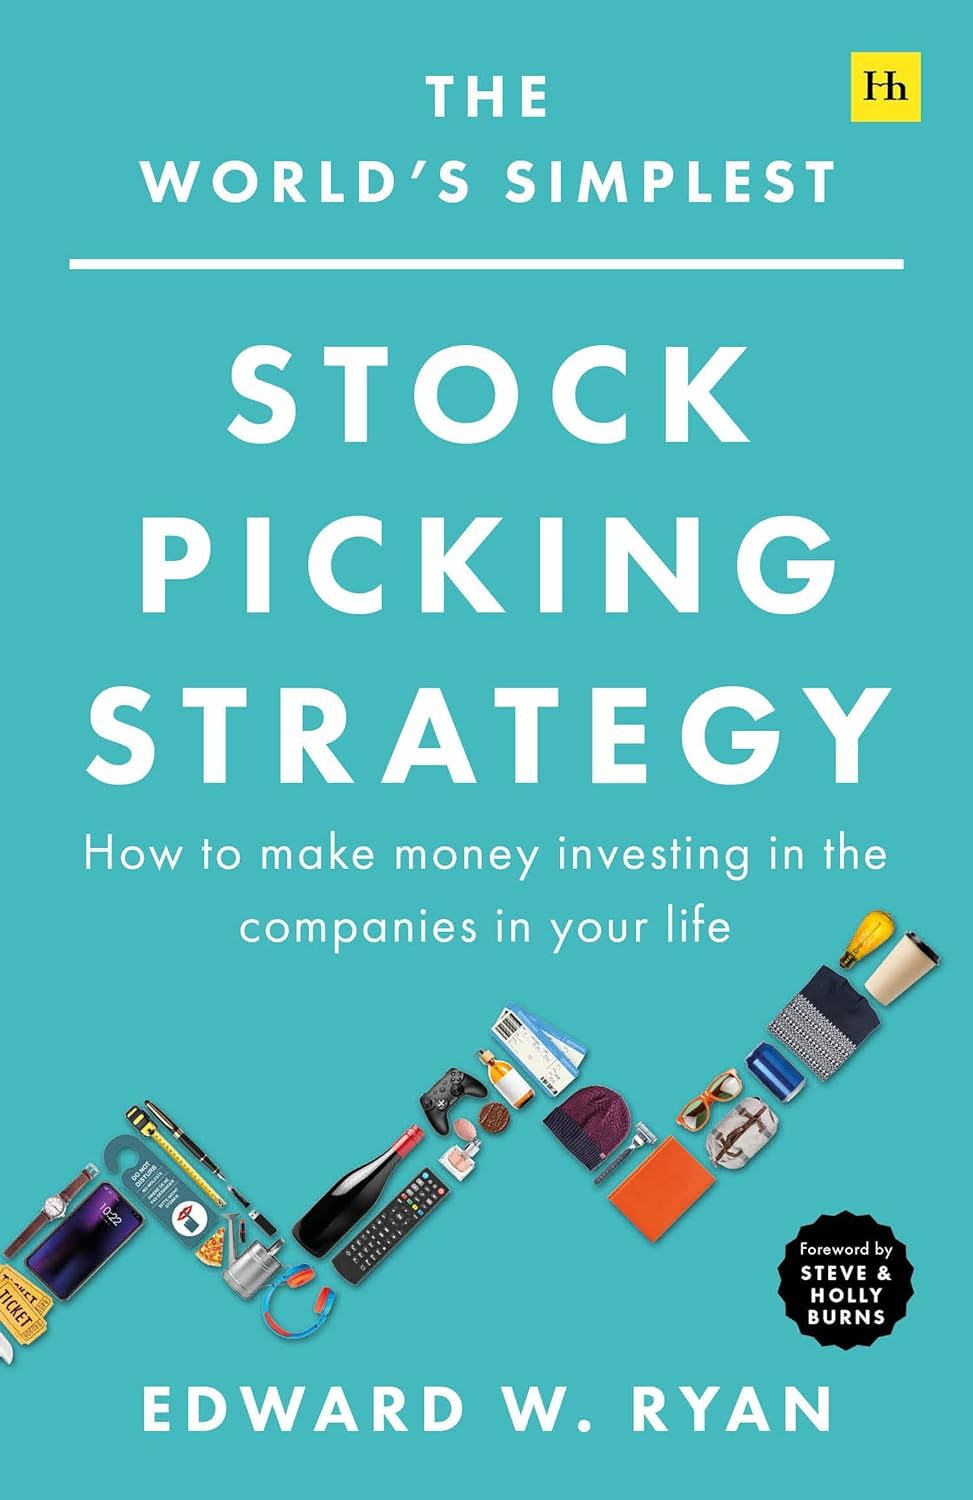 he World's Simplest Stock Picking Strategy